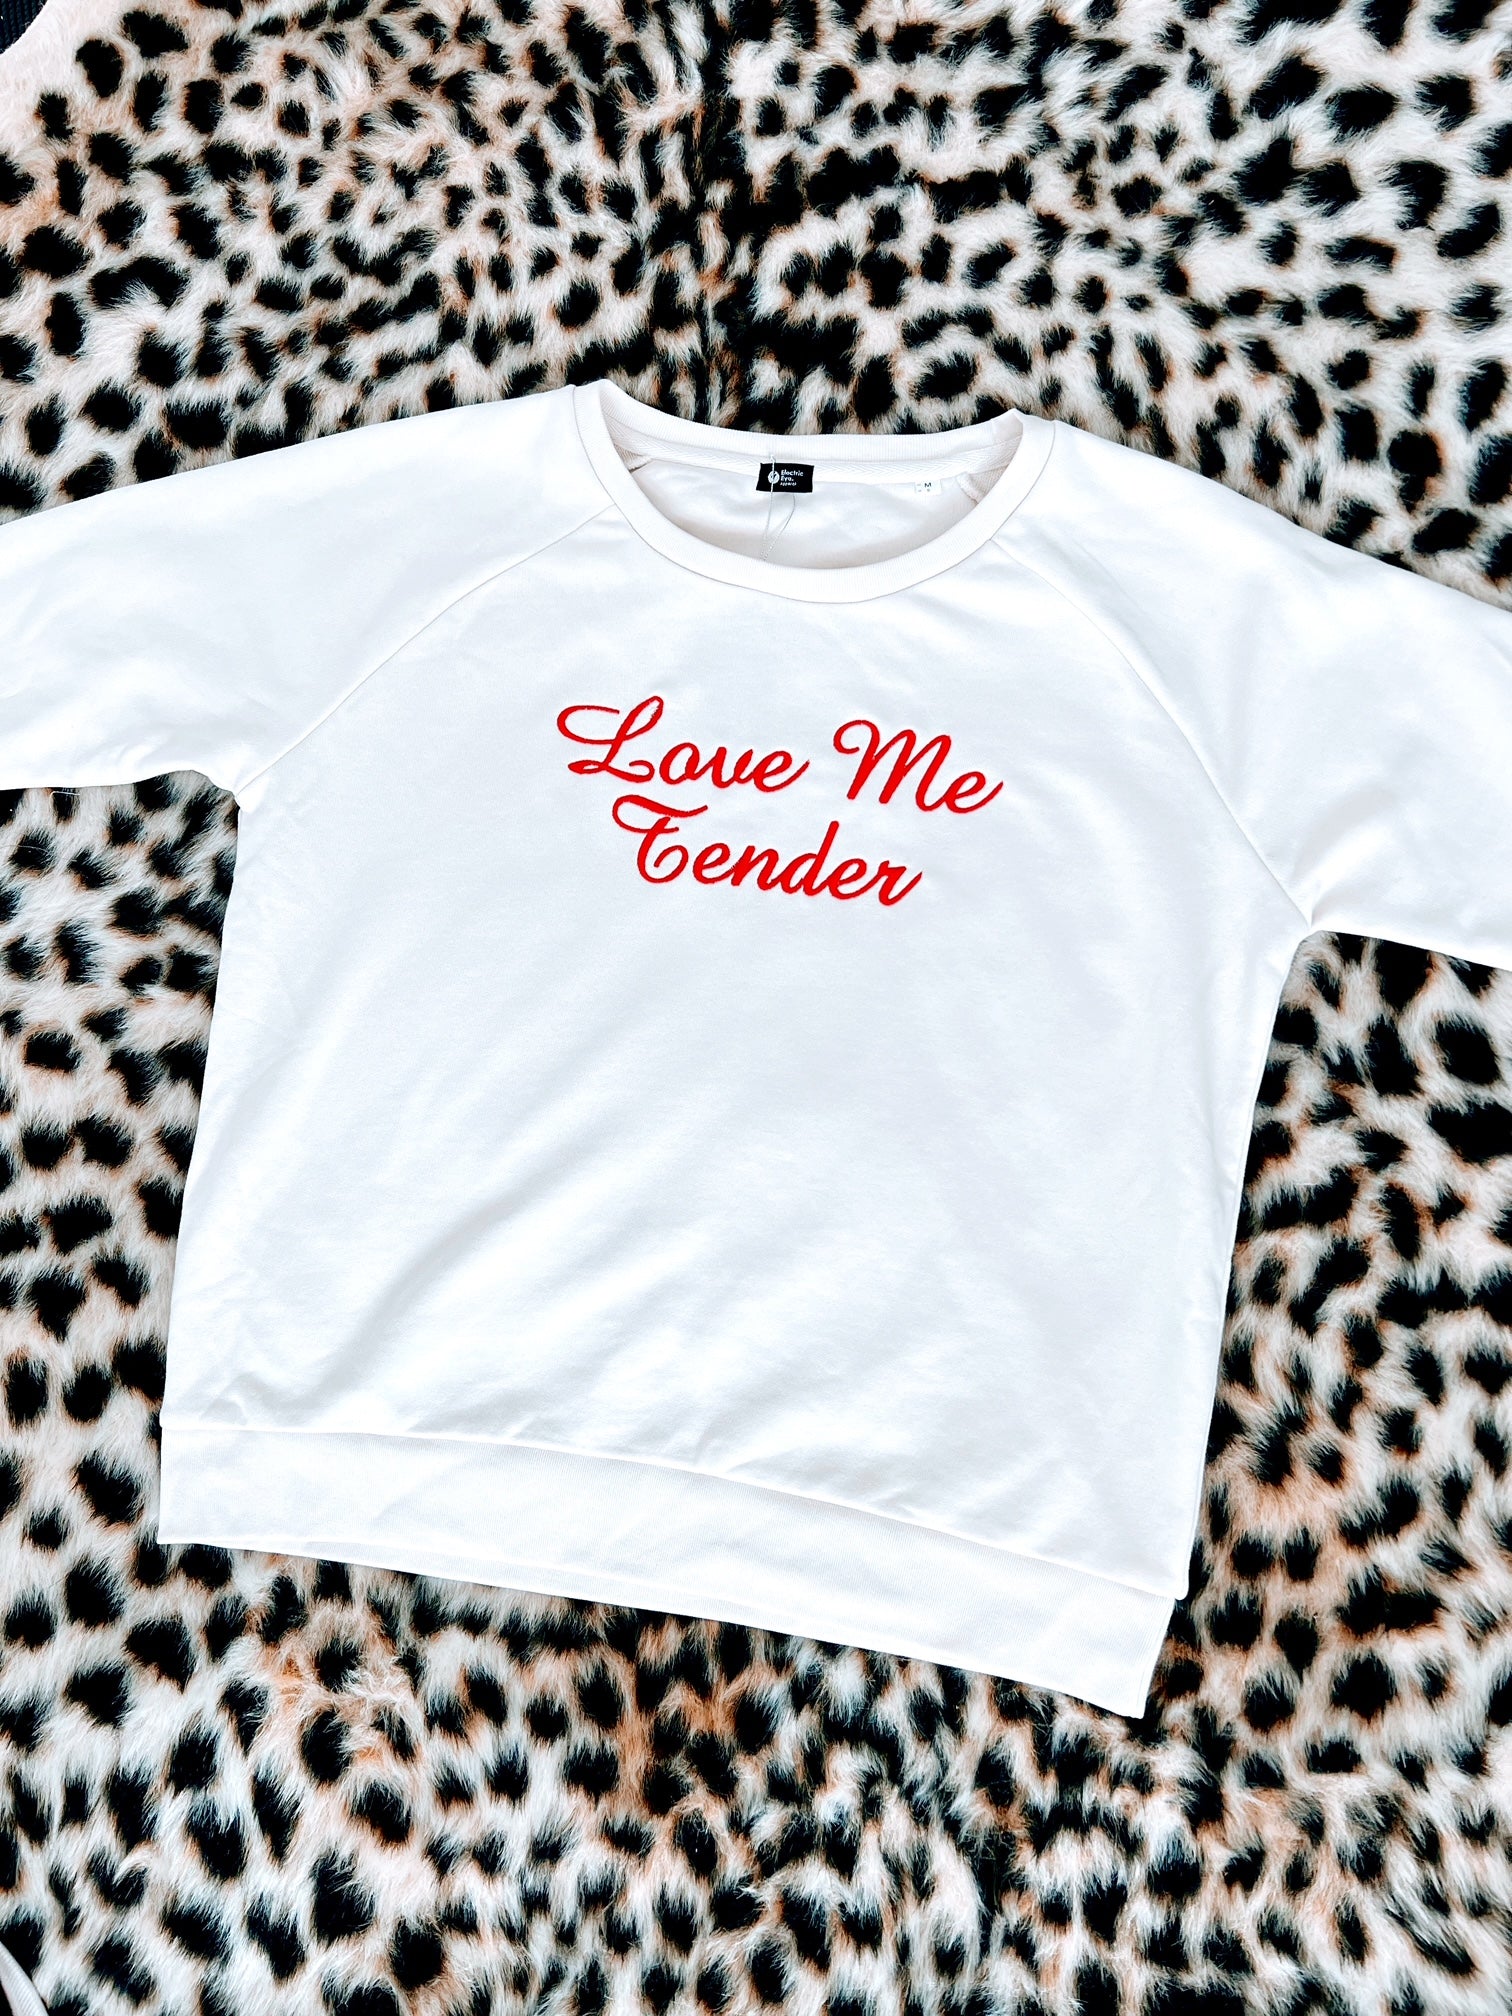 'LOVE ME TENDER' EMBROIDERED WOMEN'S ORGANIC COTTON DAZZLER SWEATSHIRT - optional embroidery colour